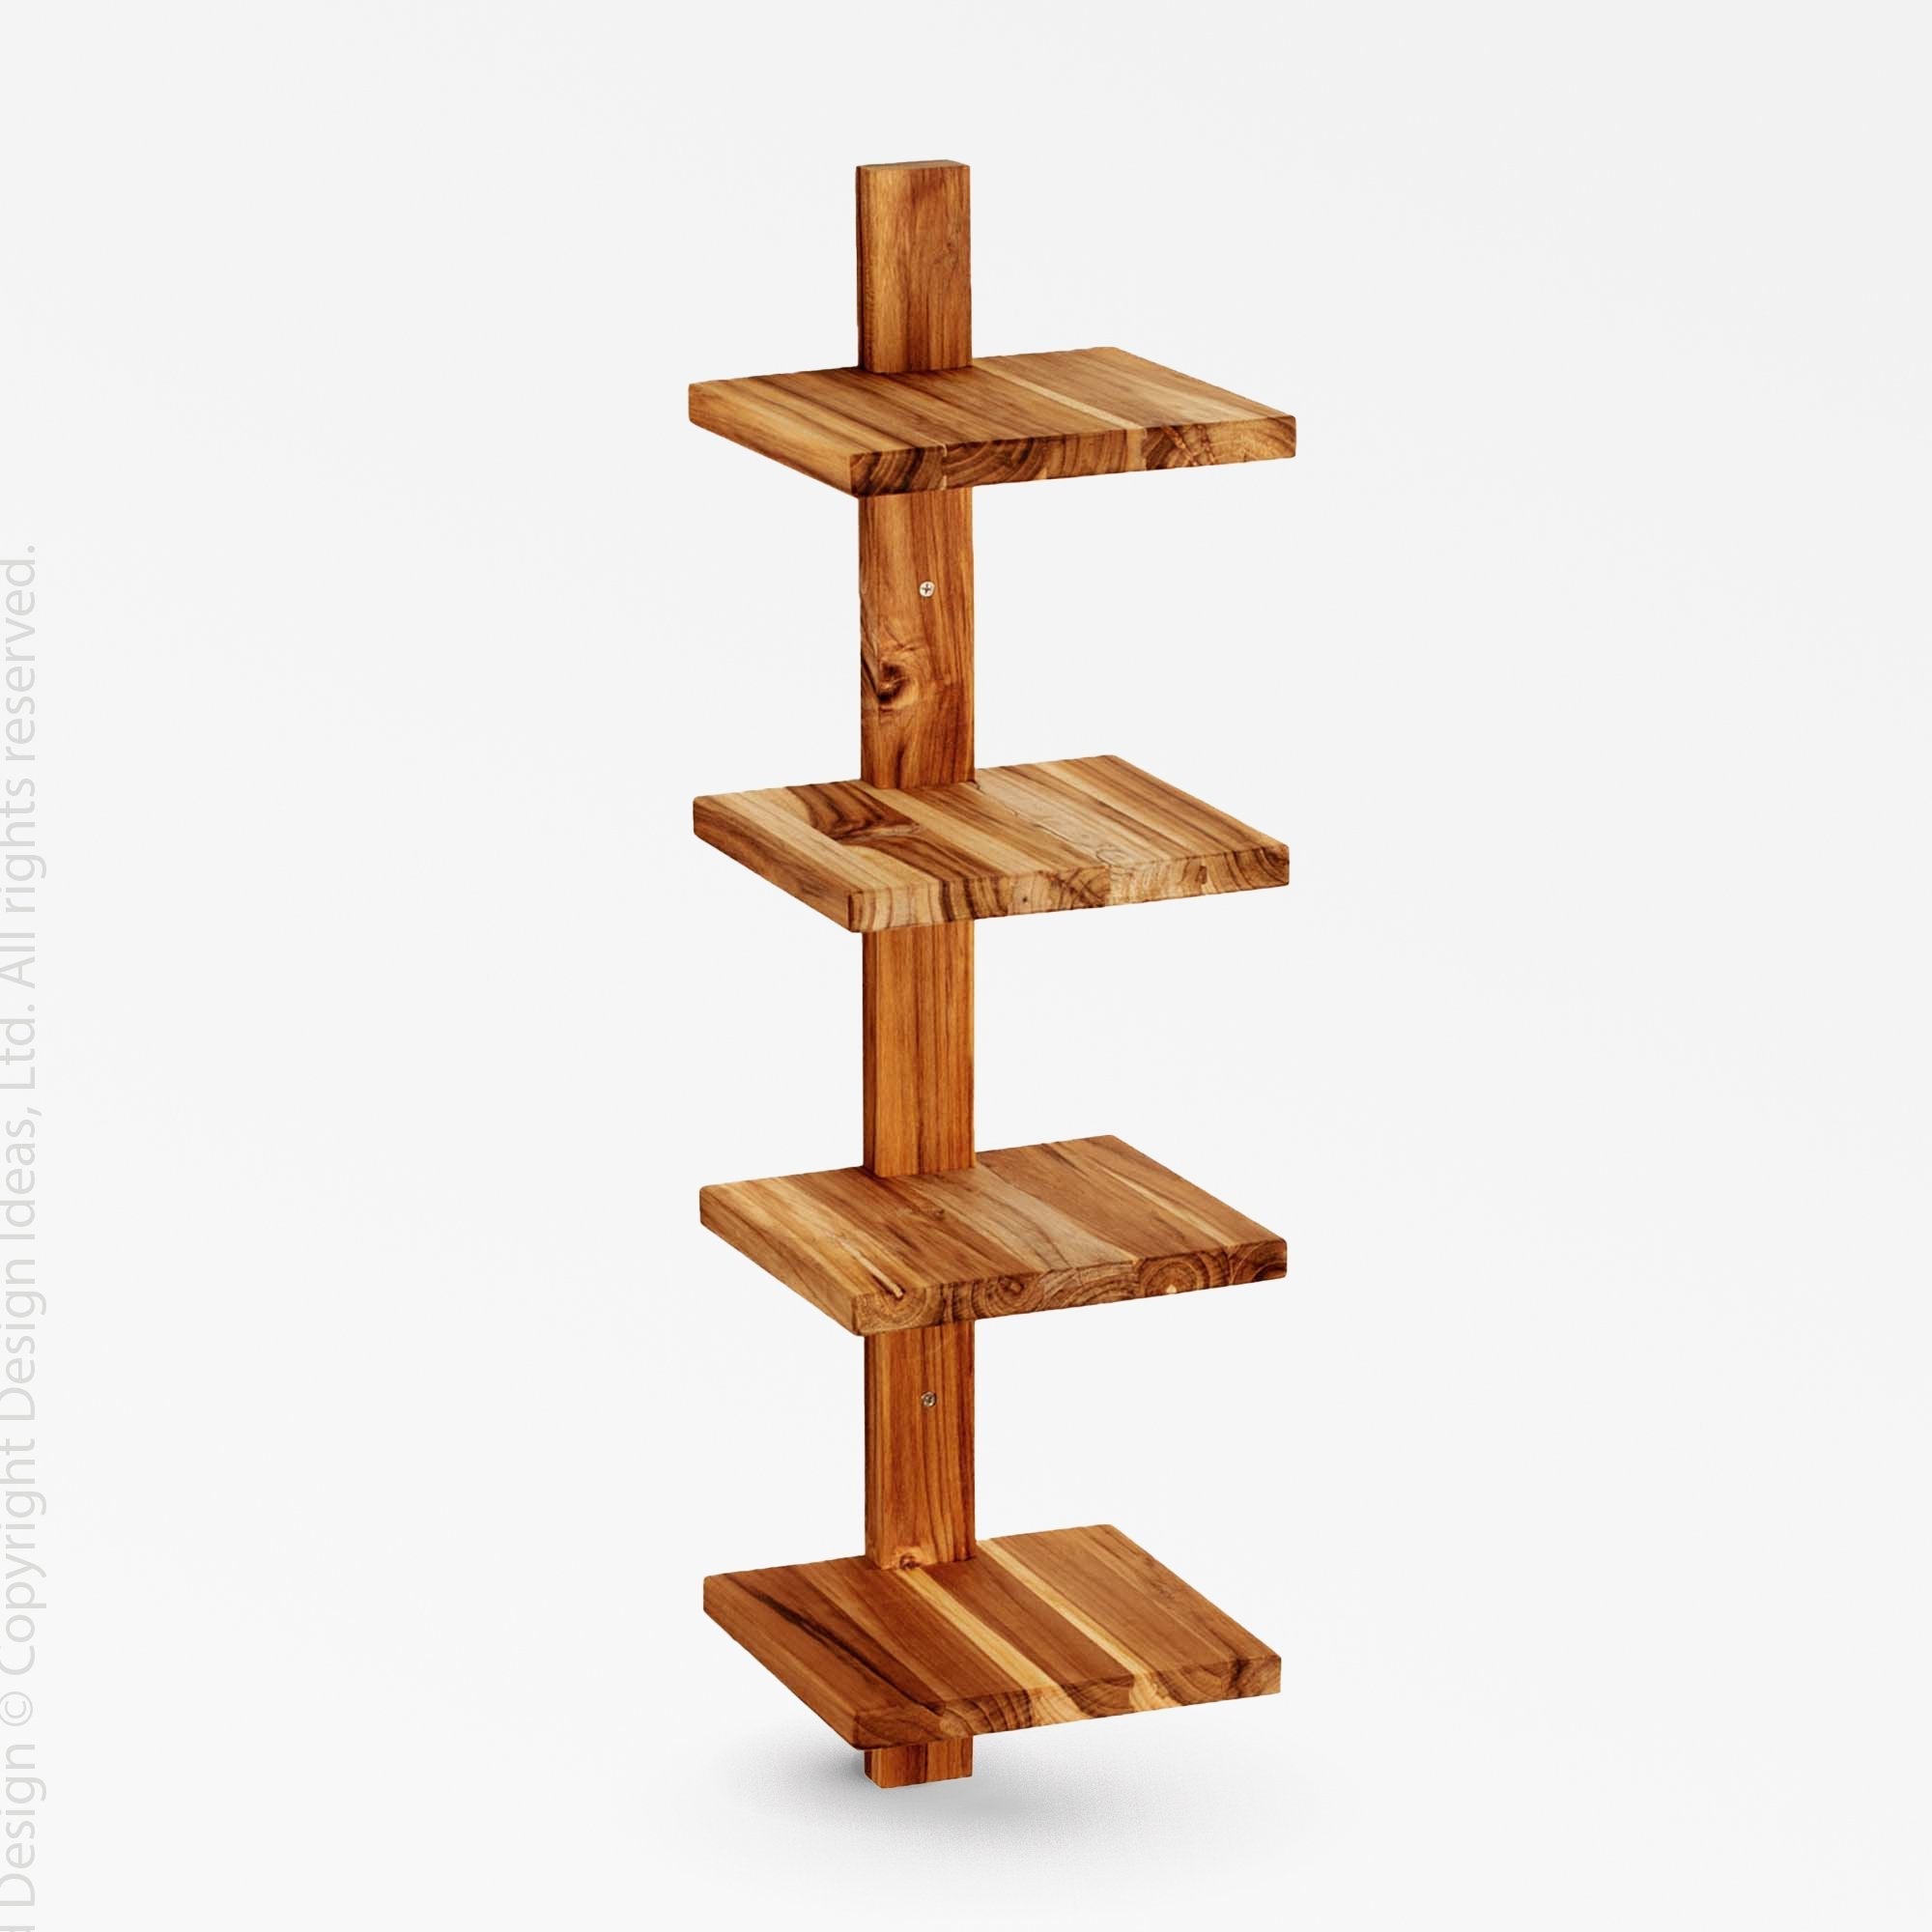 Takara Teak Column Shelf (Small) - Natural Color | Image 1 | From the Takara Collection | Elegantly assembled with solid teak for long lasting use | This shelf is sustainably sourced | Available in natural color | texxture home